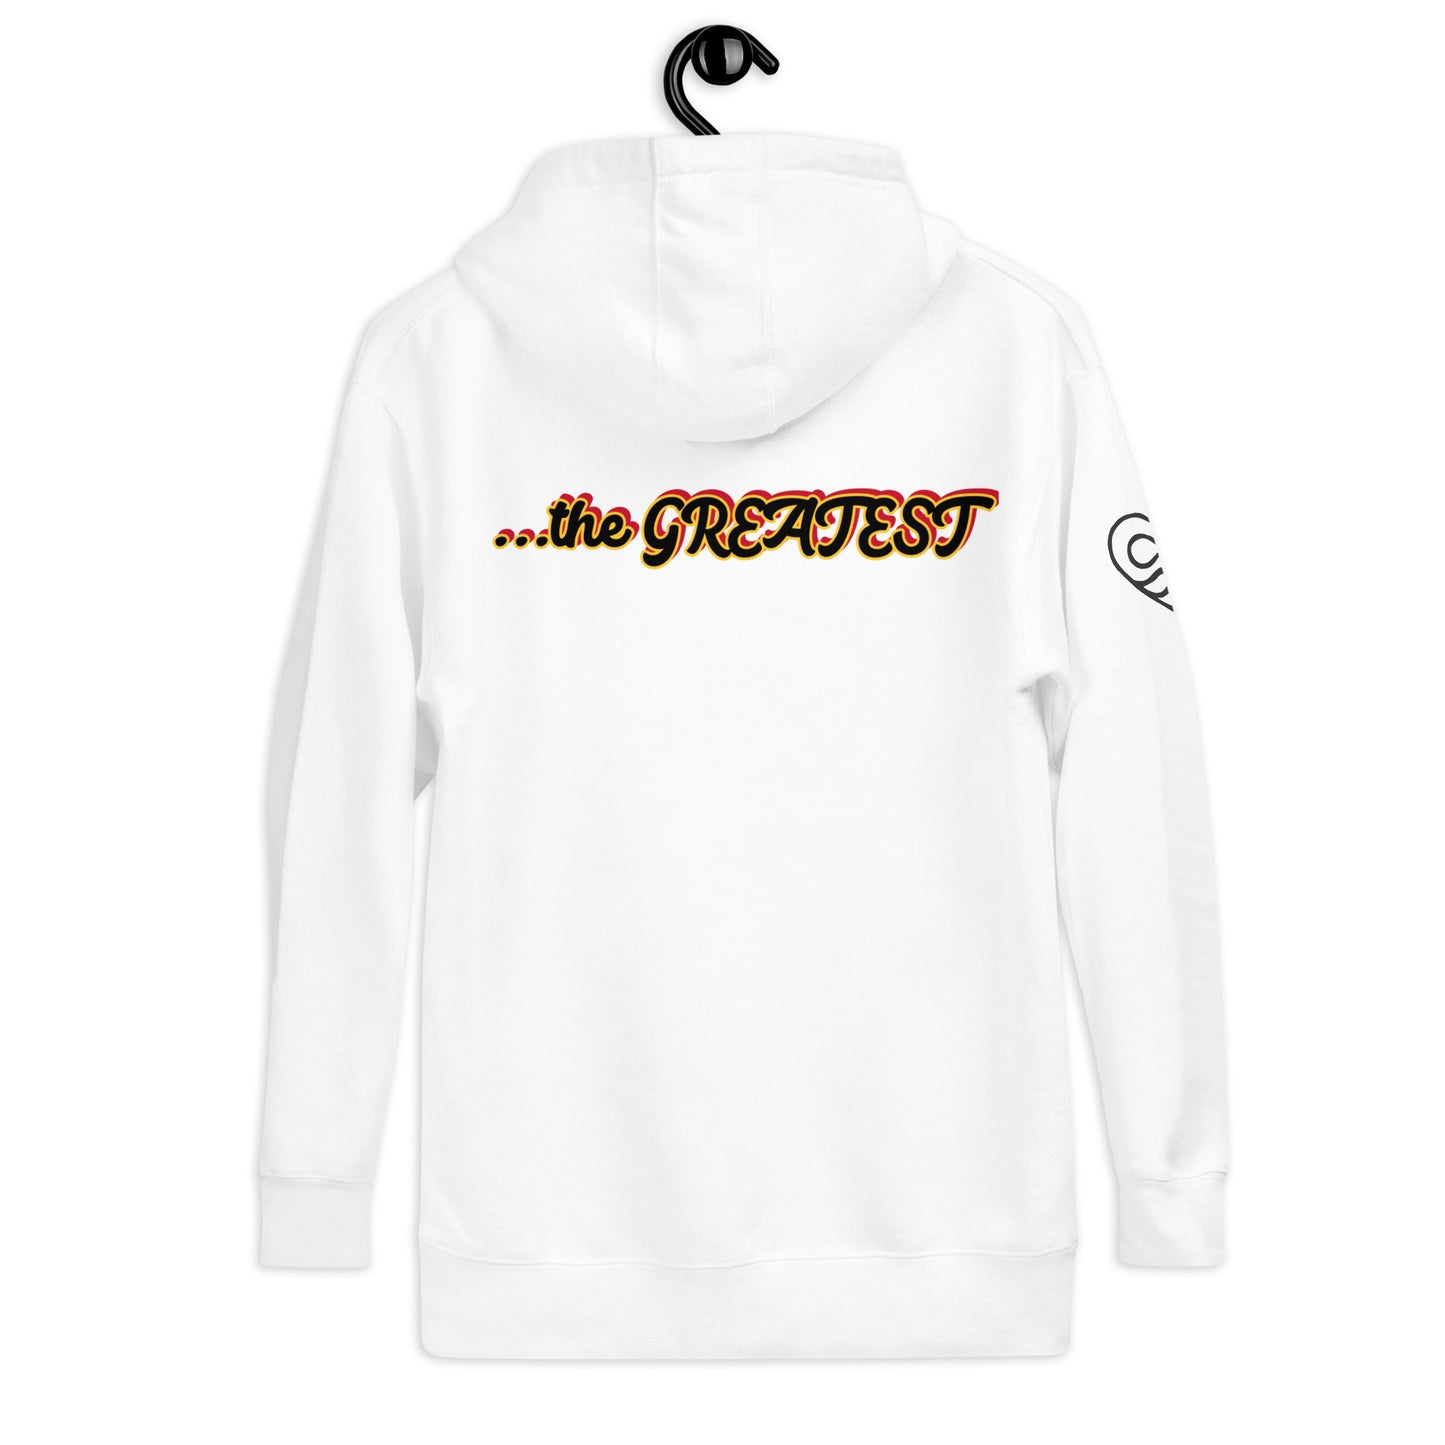 I AM the Greatest Hoodie